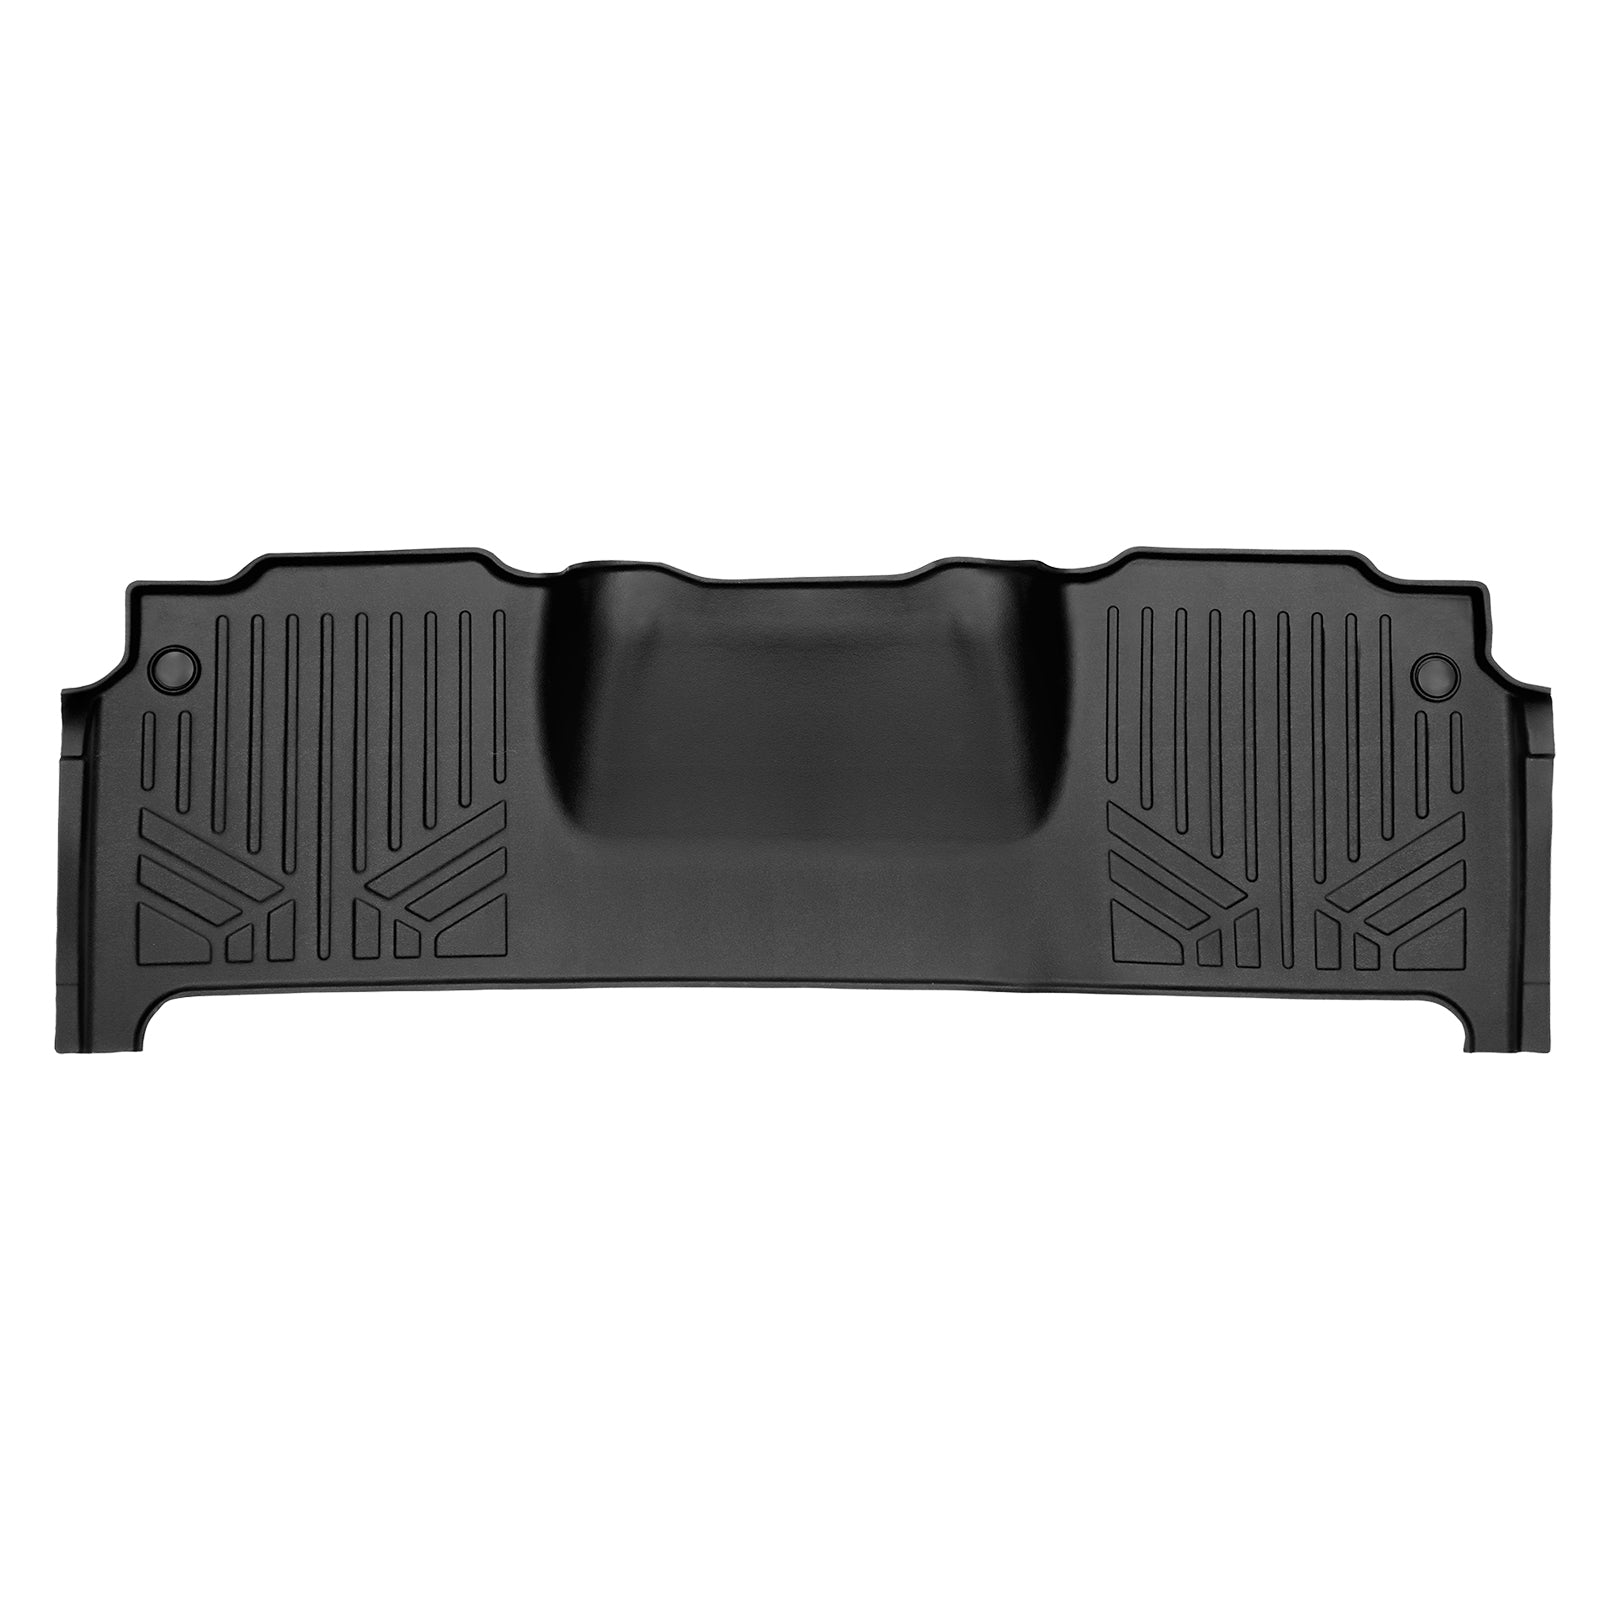 SMARTLINER Custom Fit Floor Liners For 2019-2022 Ram 2500/3500 Mega Cab with 1st Row Bench Seat